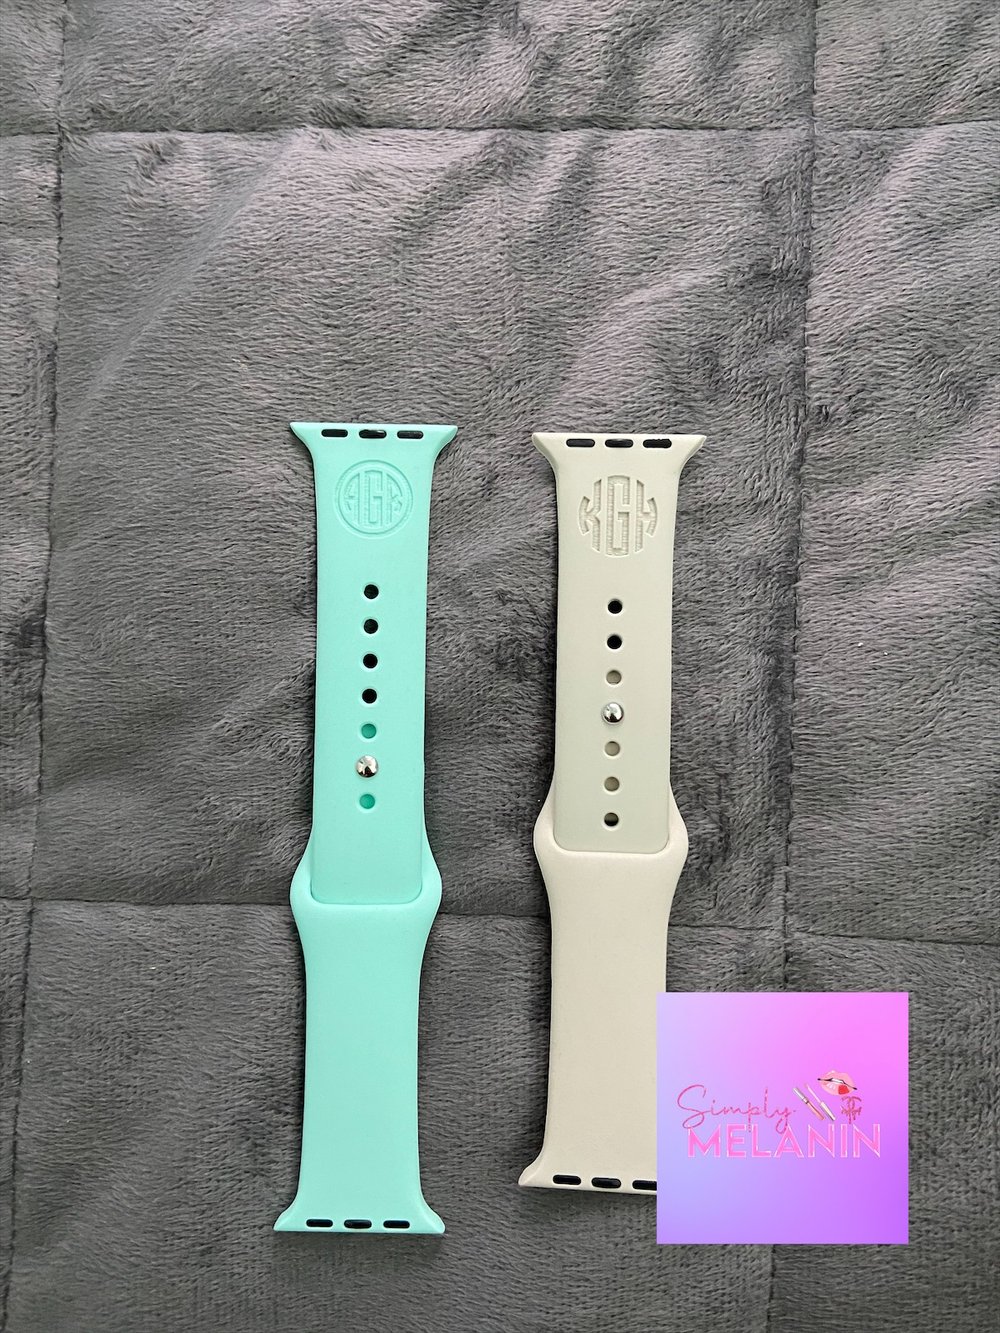 Image of monogrammed apple watch bands 🖤.